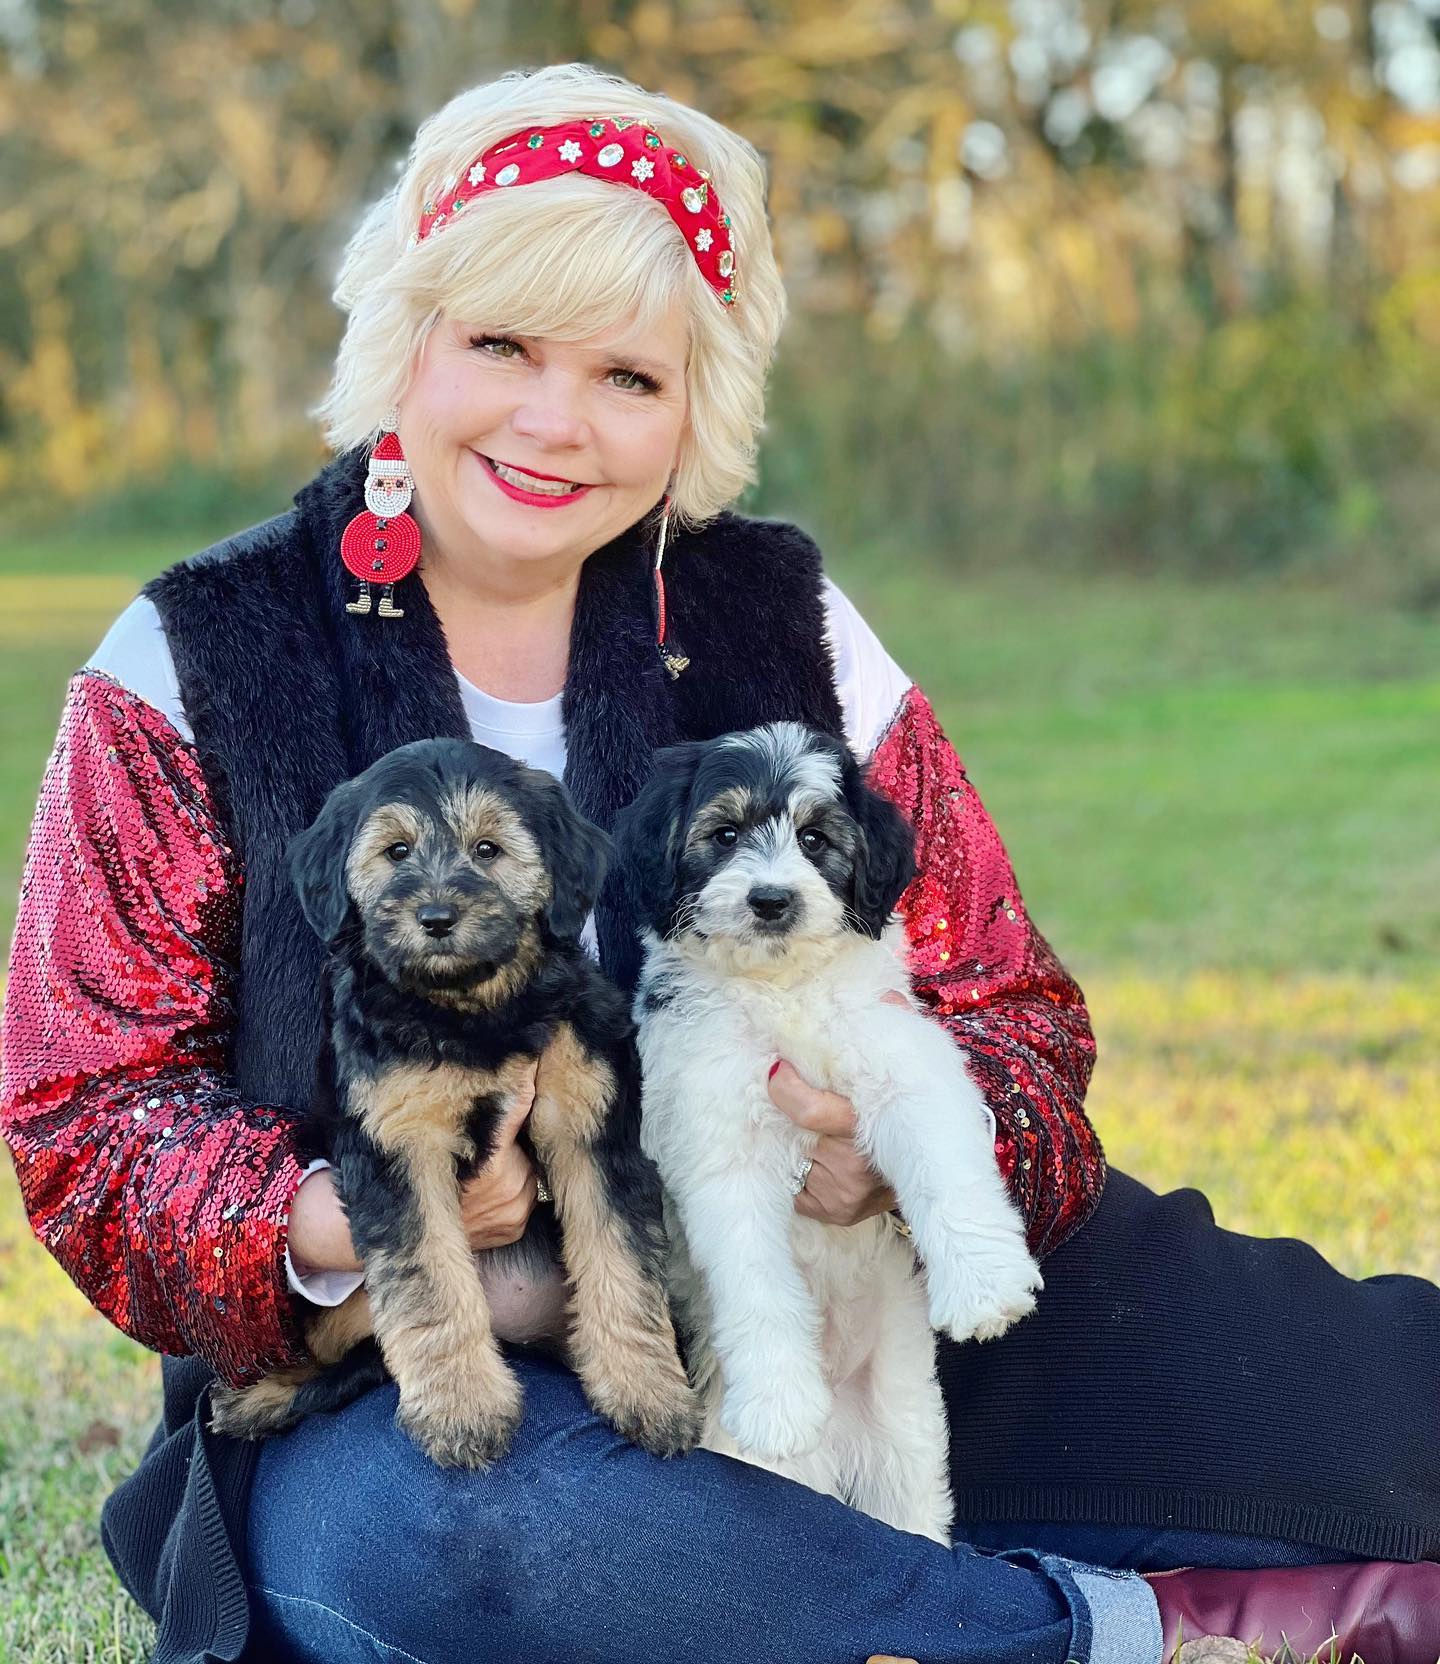 Sherri Smeraglia holds a black and white parti golden doodle. This breed is known for its rare, beautiful black and white coloring. Goldendoodles also produce some of the most beautiful, rare markings and any other dog breed.